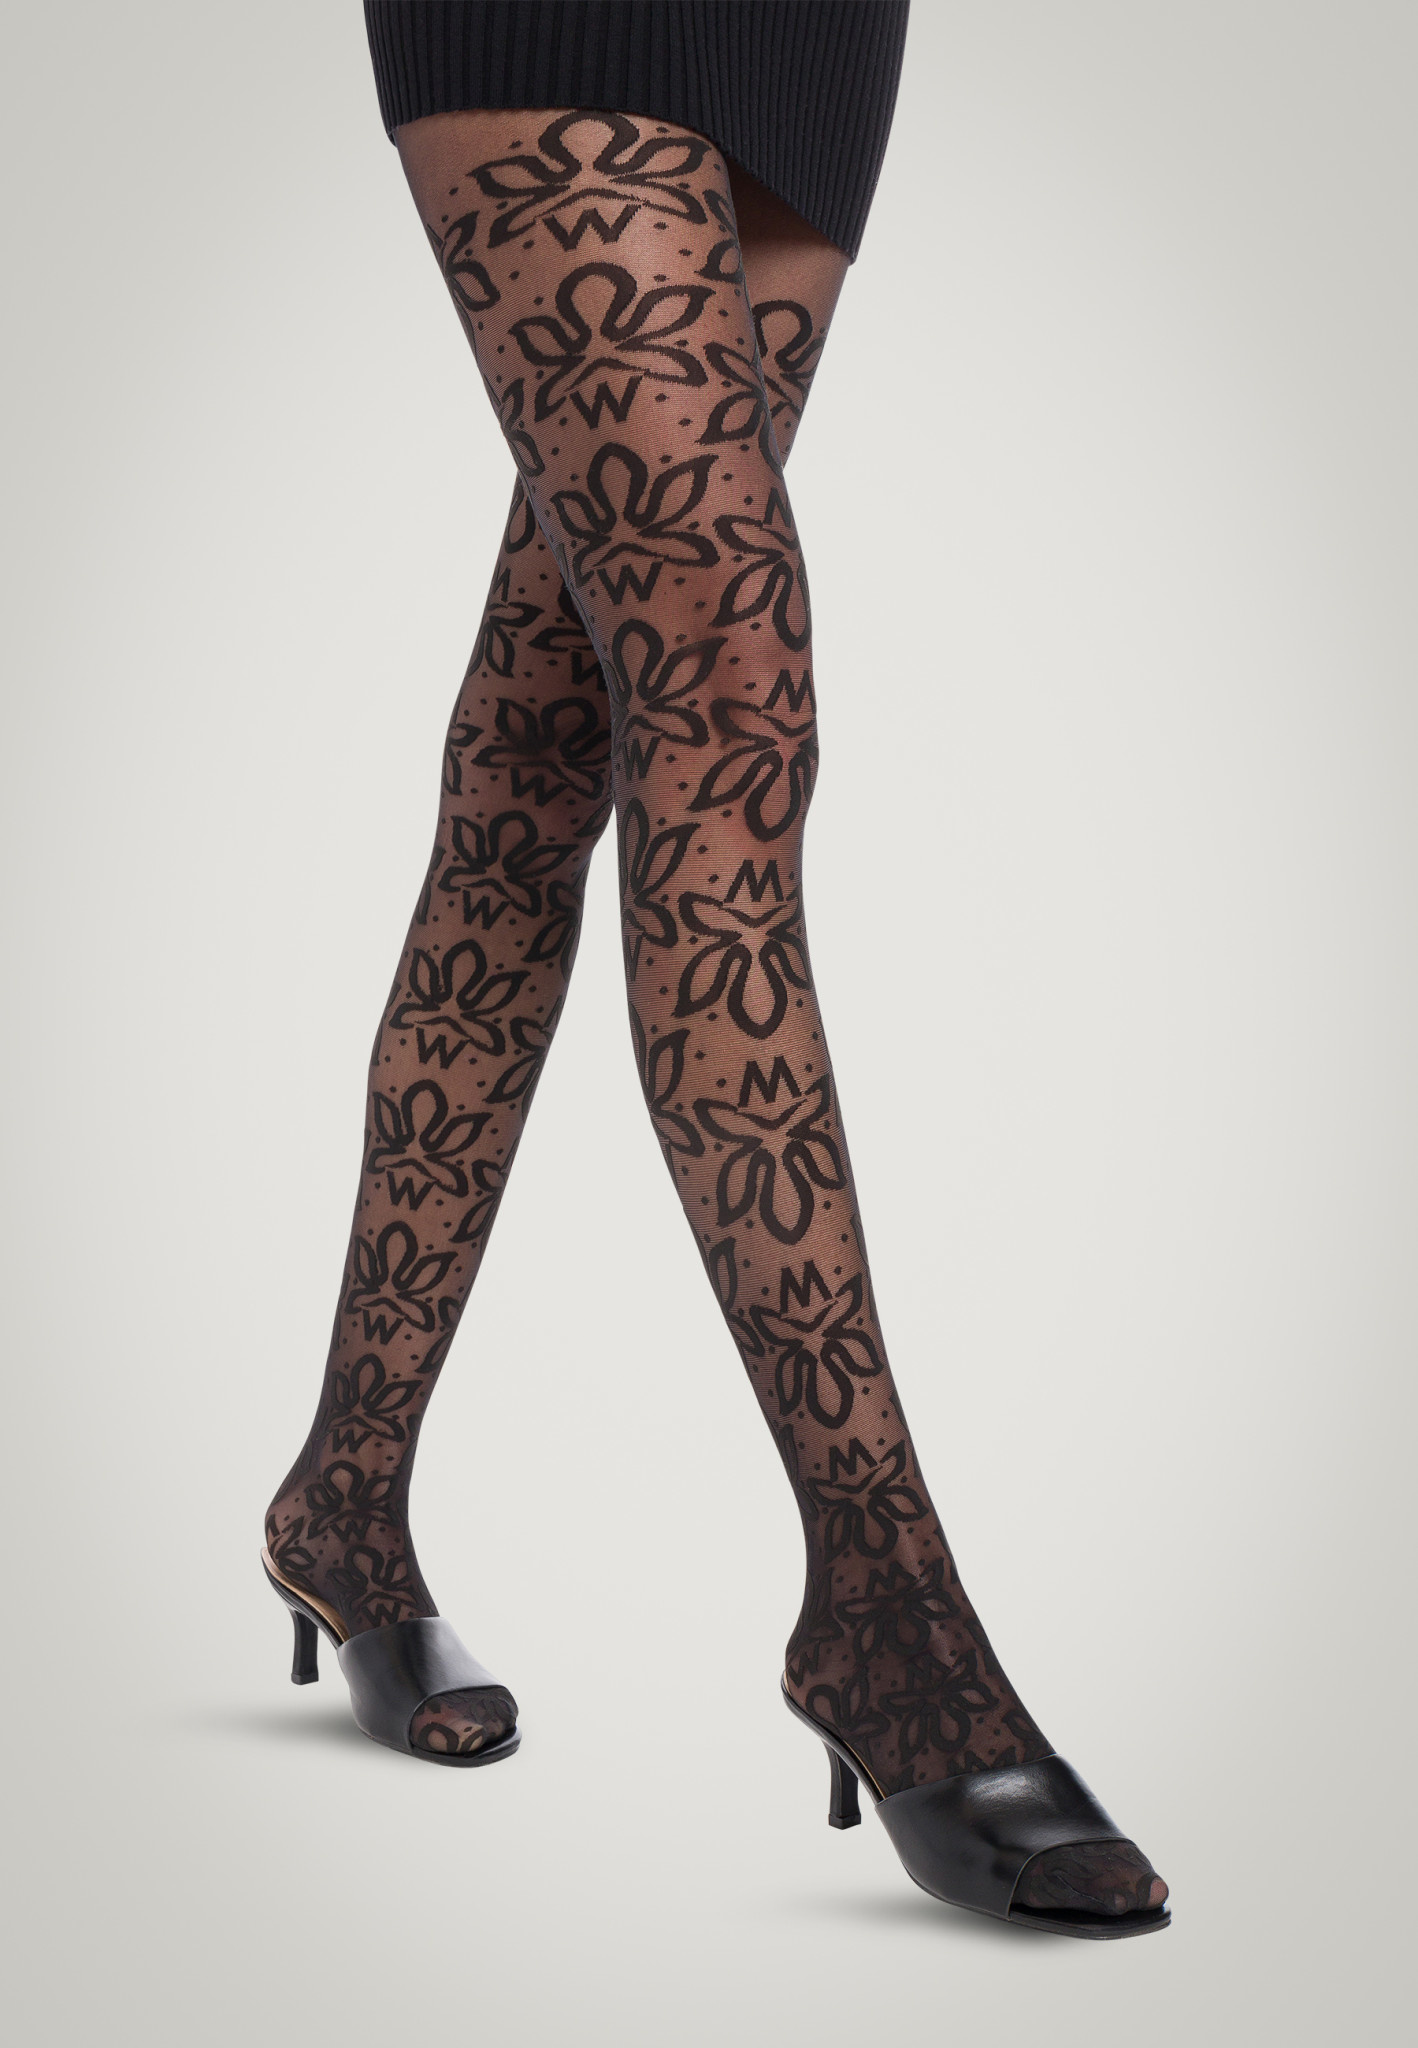 Floral or Less Pattern Tights